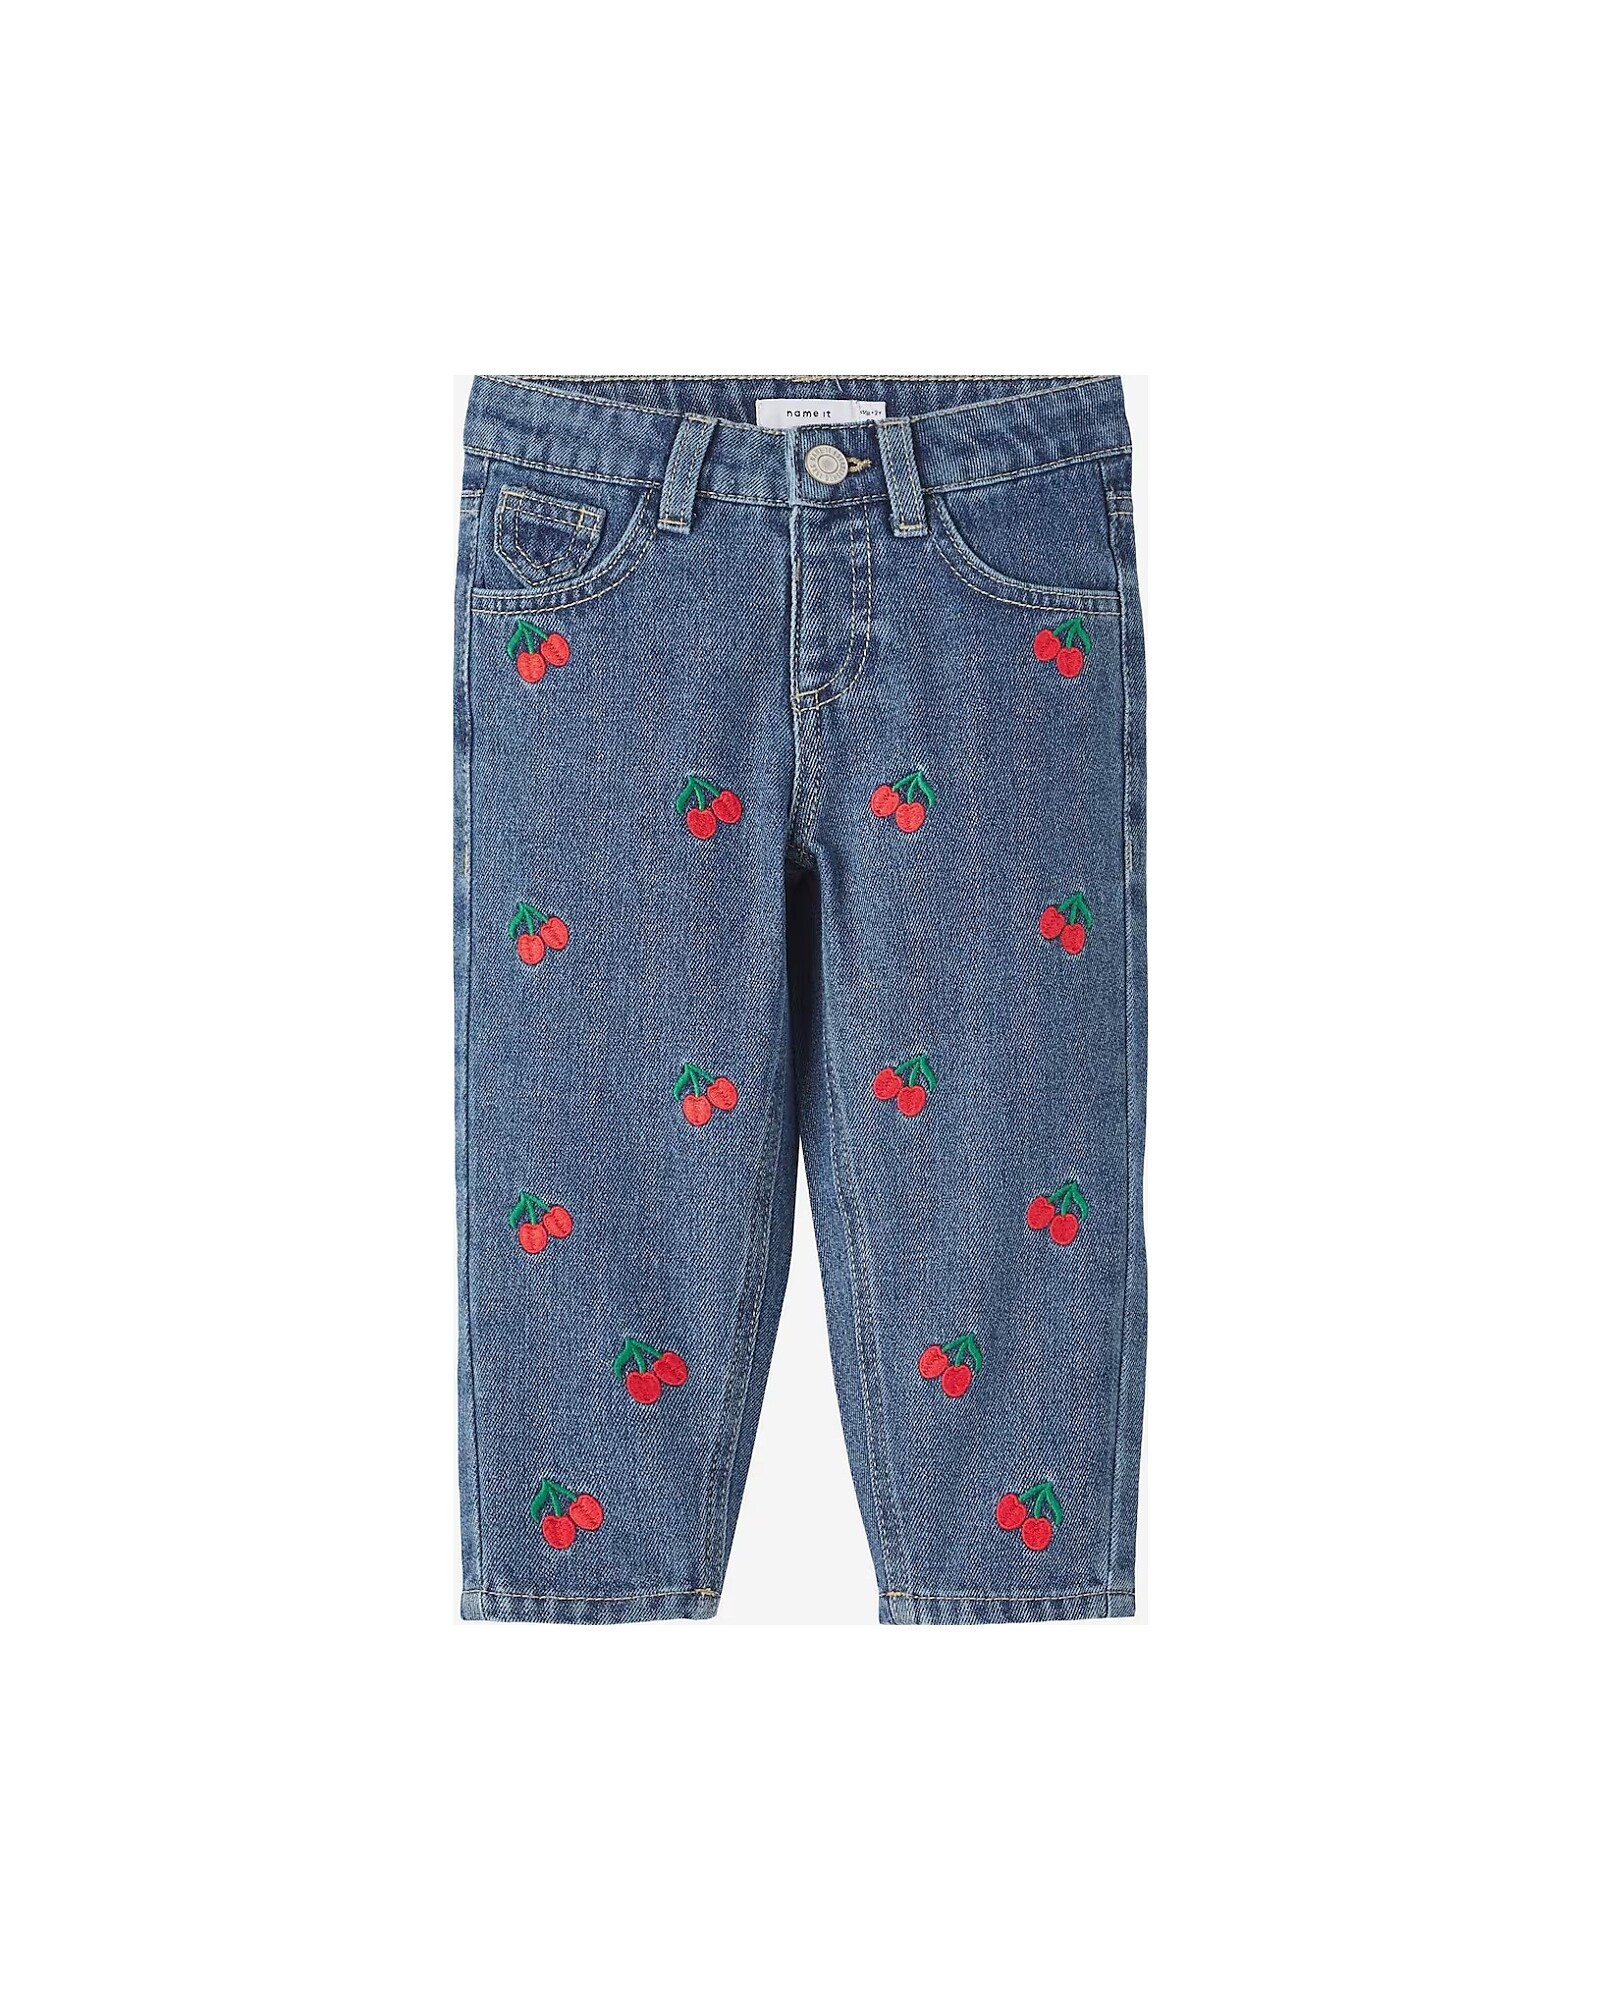 Name Jeans - Dark Blue Denim - Cherries - with Snap Button unisex (bambini)